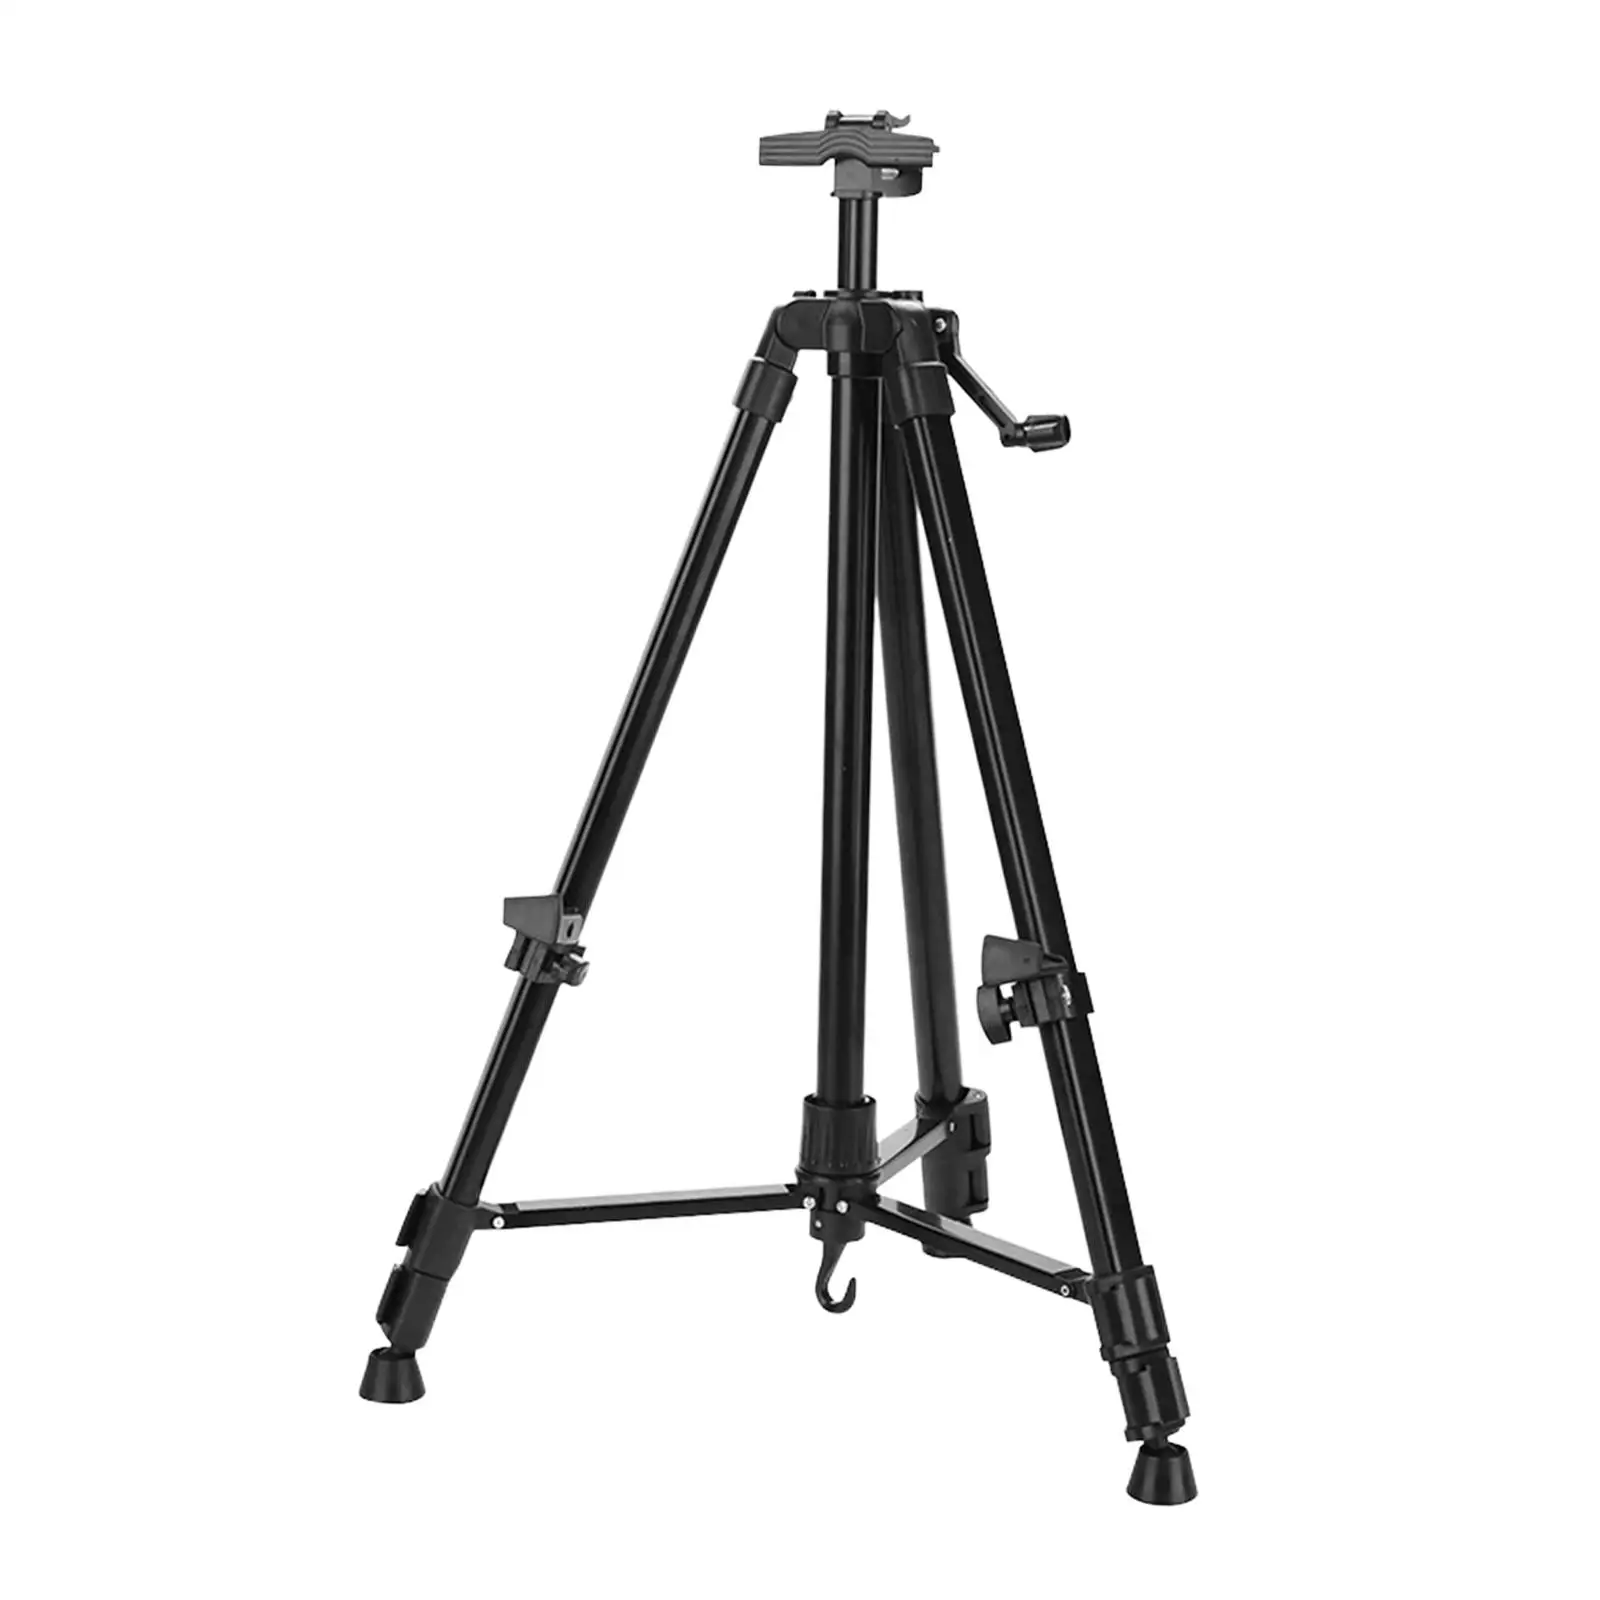 Easel Stand Artist Easel Aluminum Alloy Durable Professional for Drawing and Displaying Stable with Carrying Case 60 Inches Tall